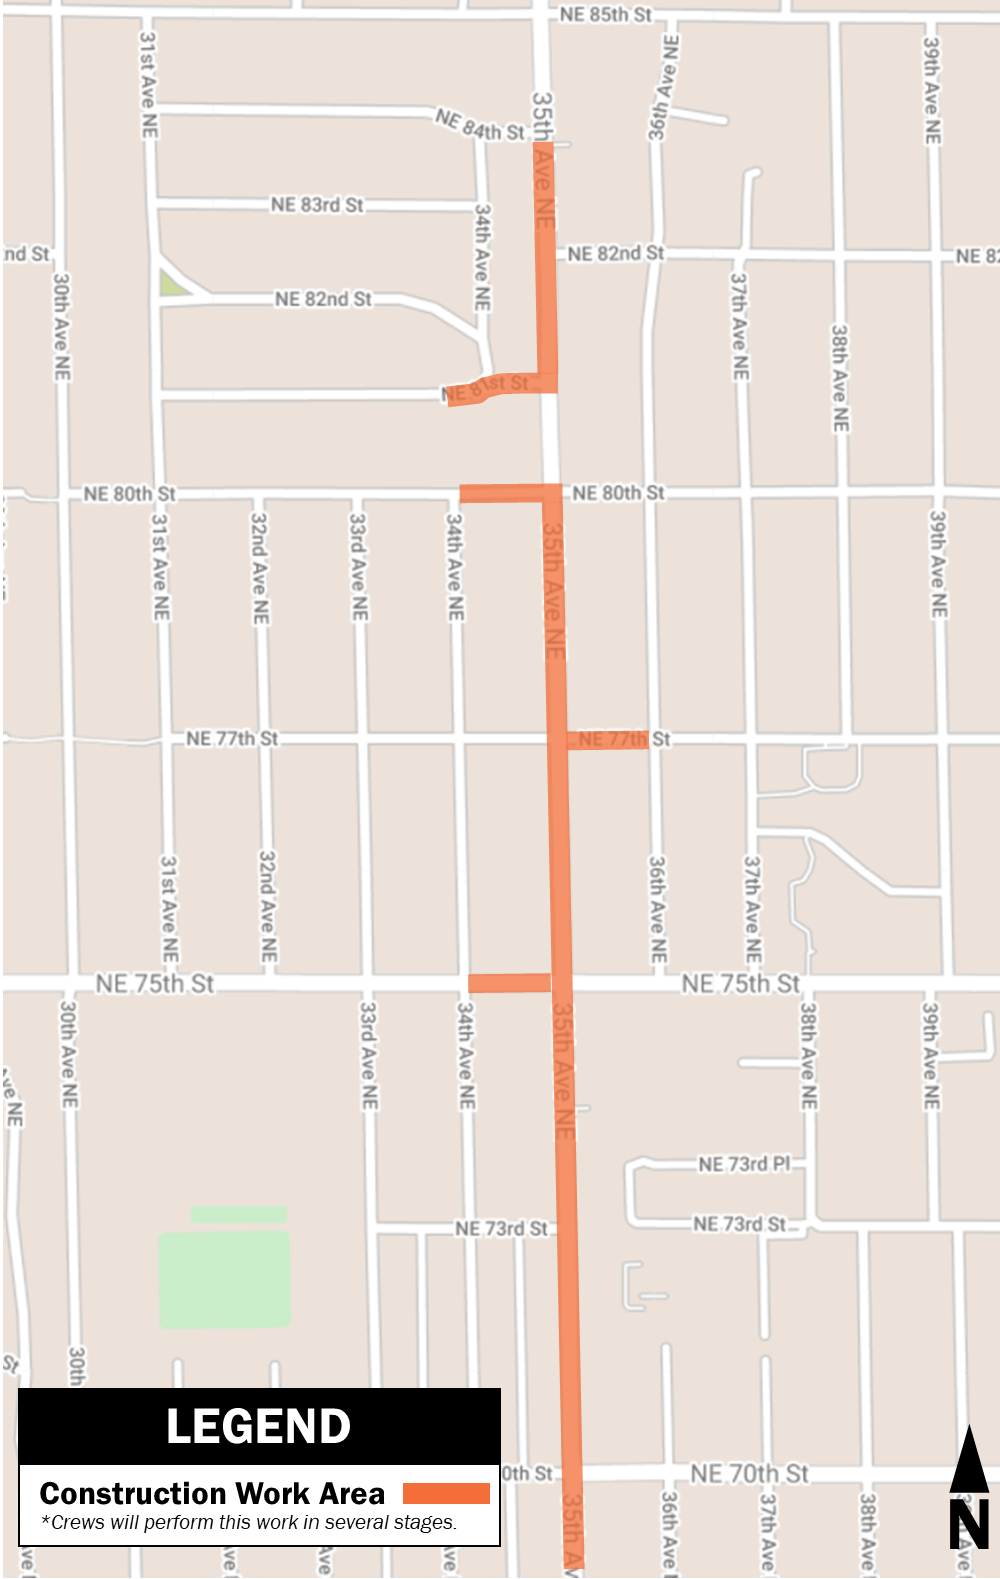 Map showing construction work area on 35th Avenue NE